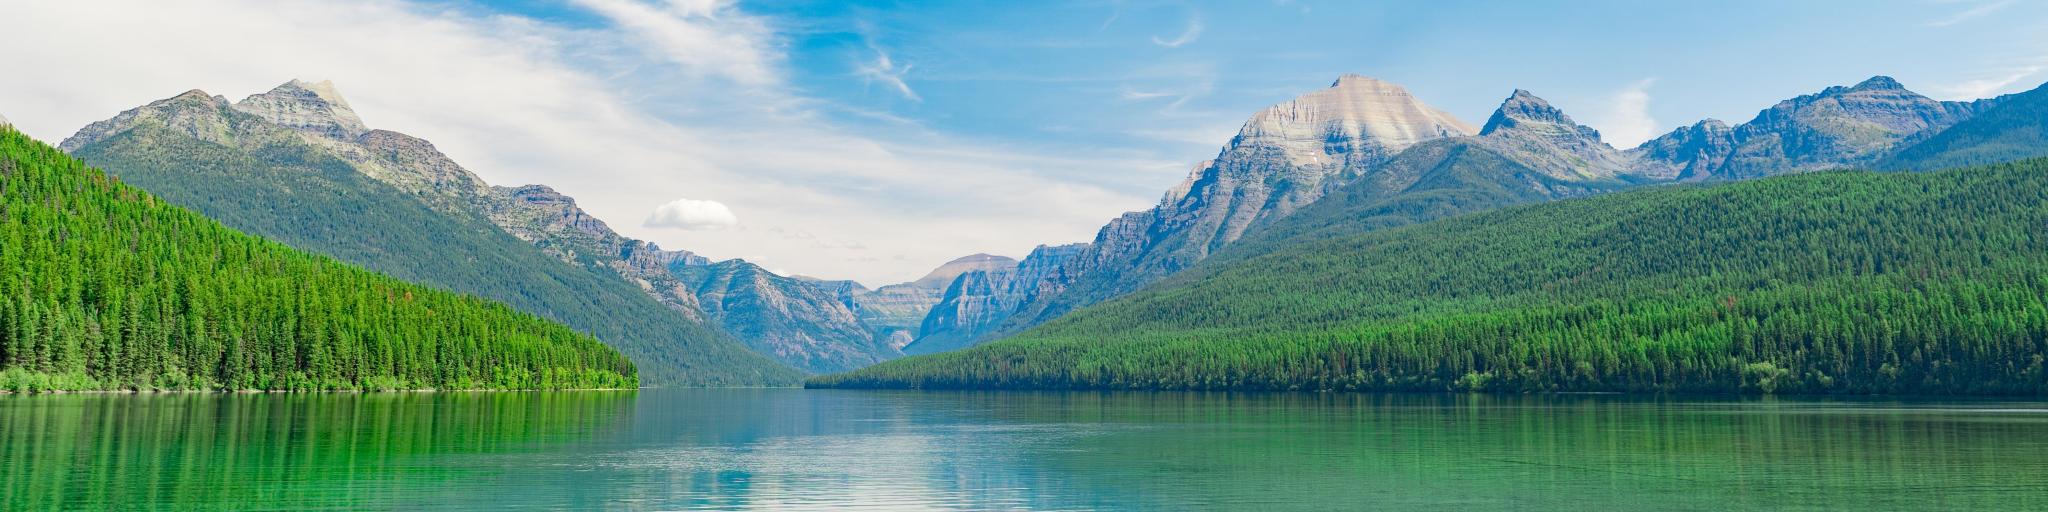 Glacier National Park, Montana, USA with a closeup of the Bowman Lake with trees and mountains in the distance against a blue sky.